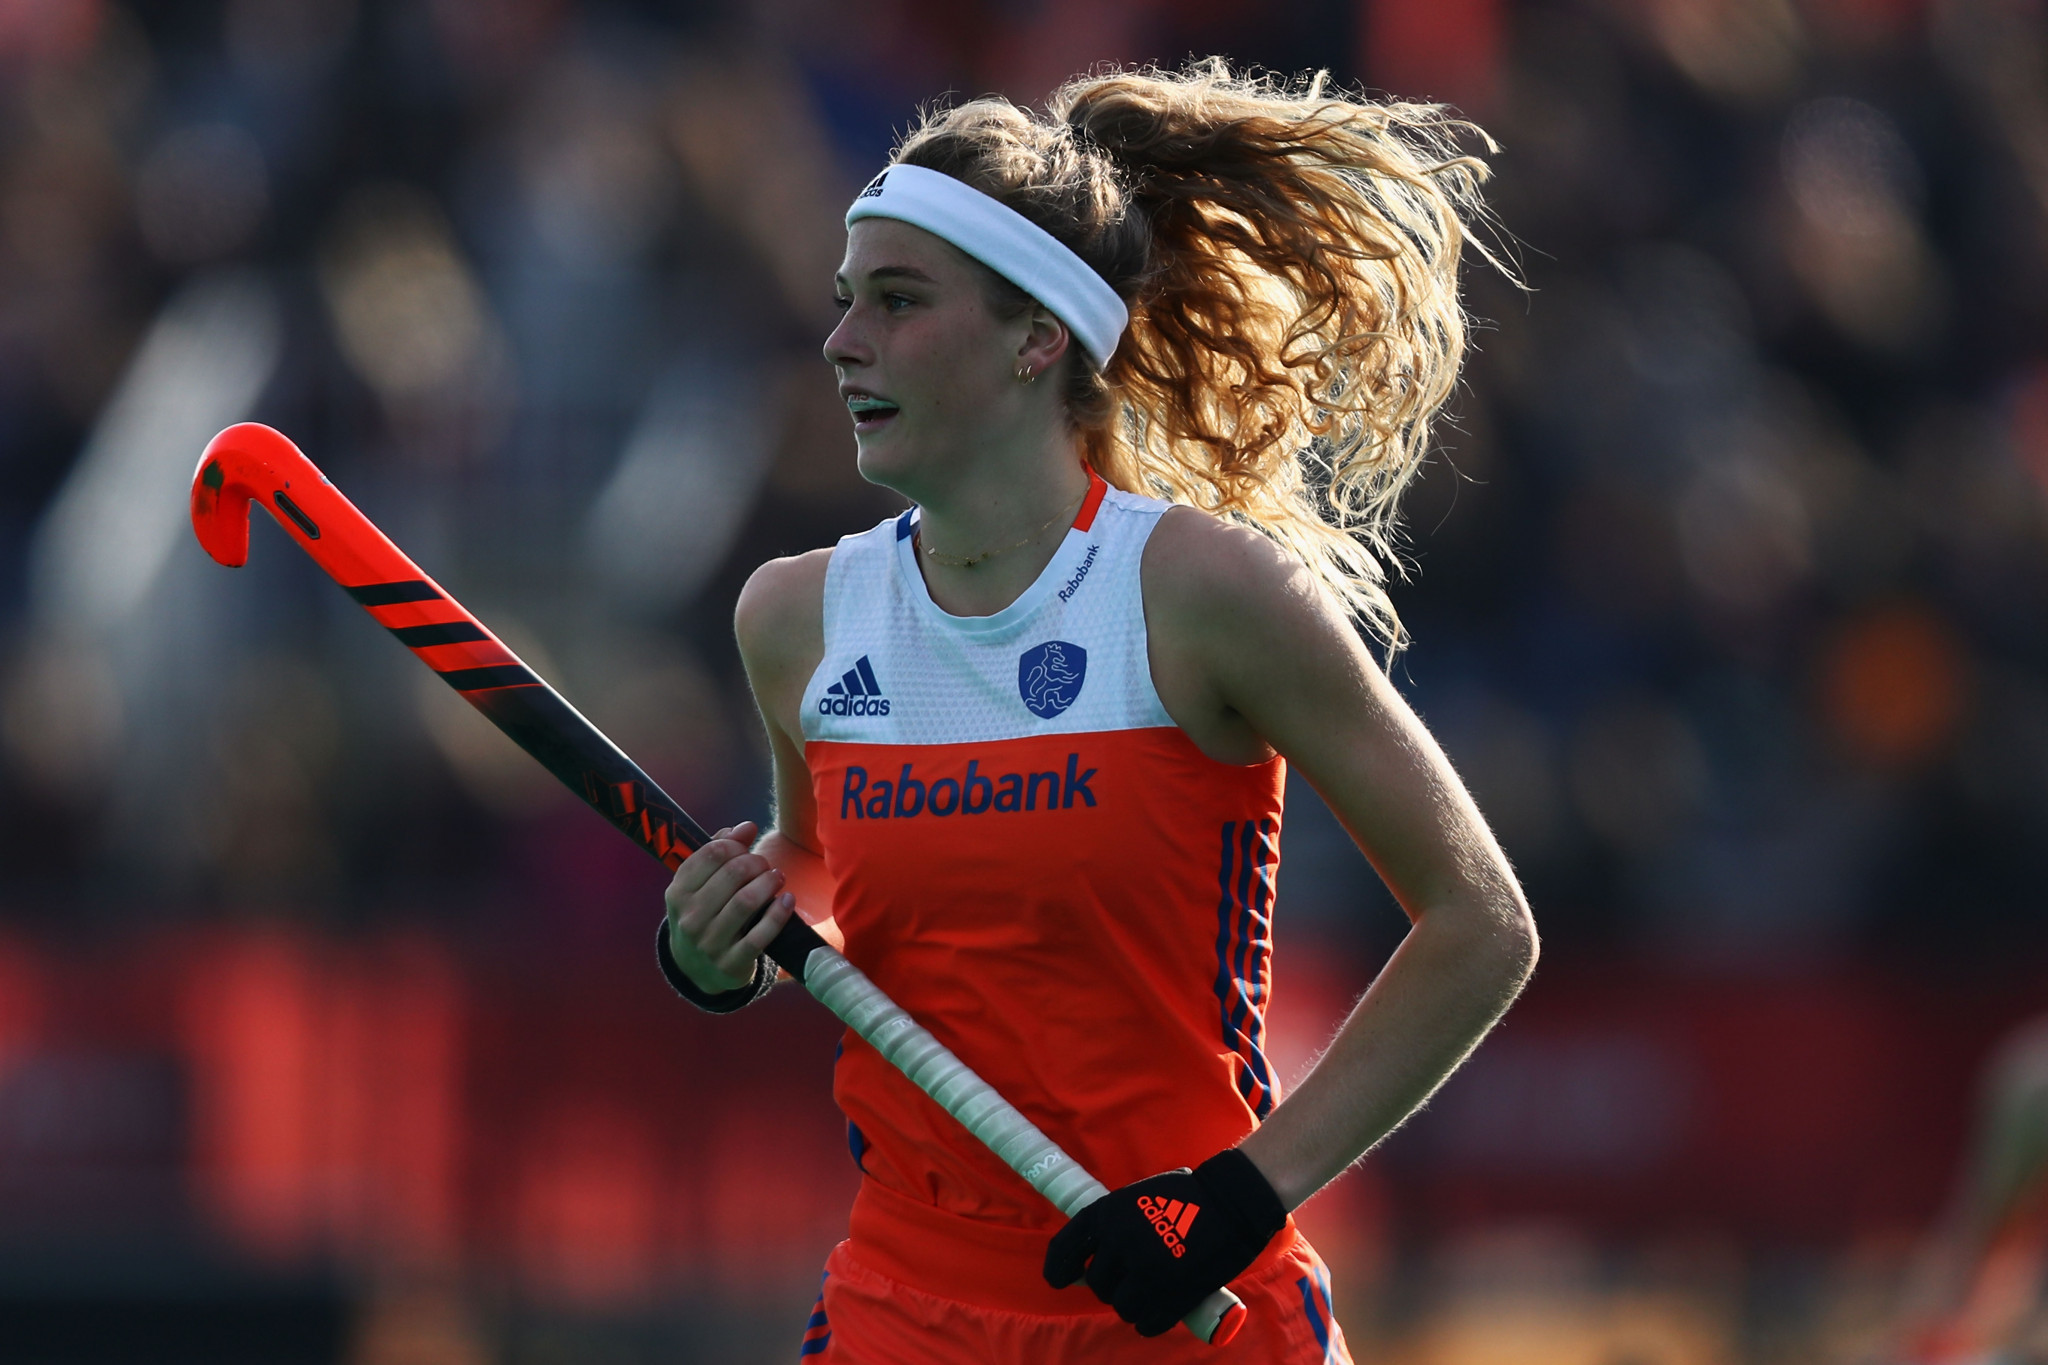 Yibbi Jansen scored a hat-trick as the Netherlands thrashed the United States ©Getty Images